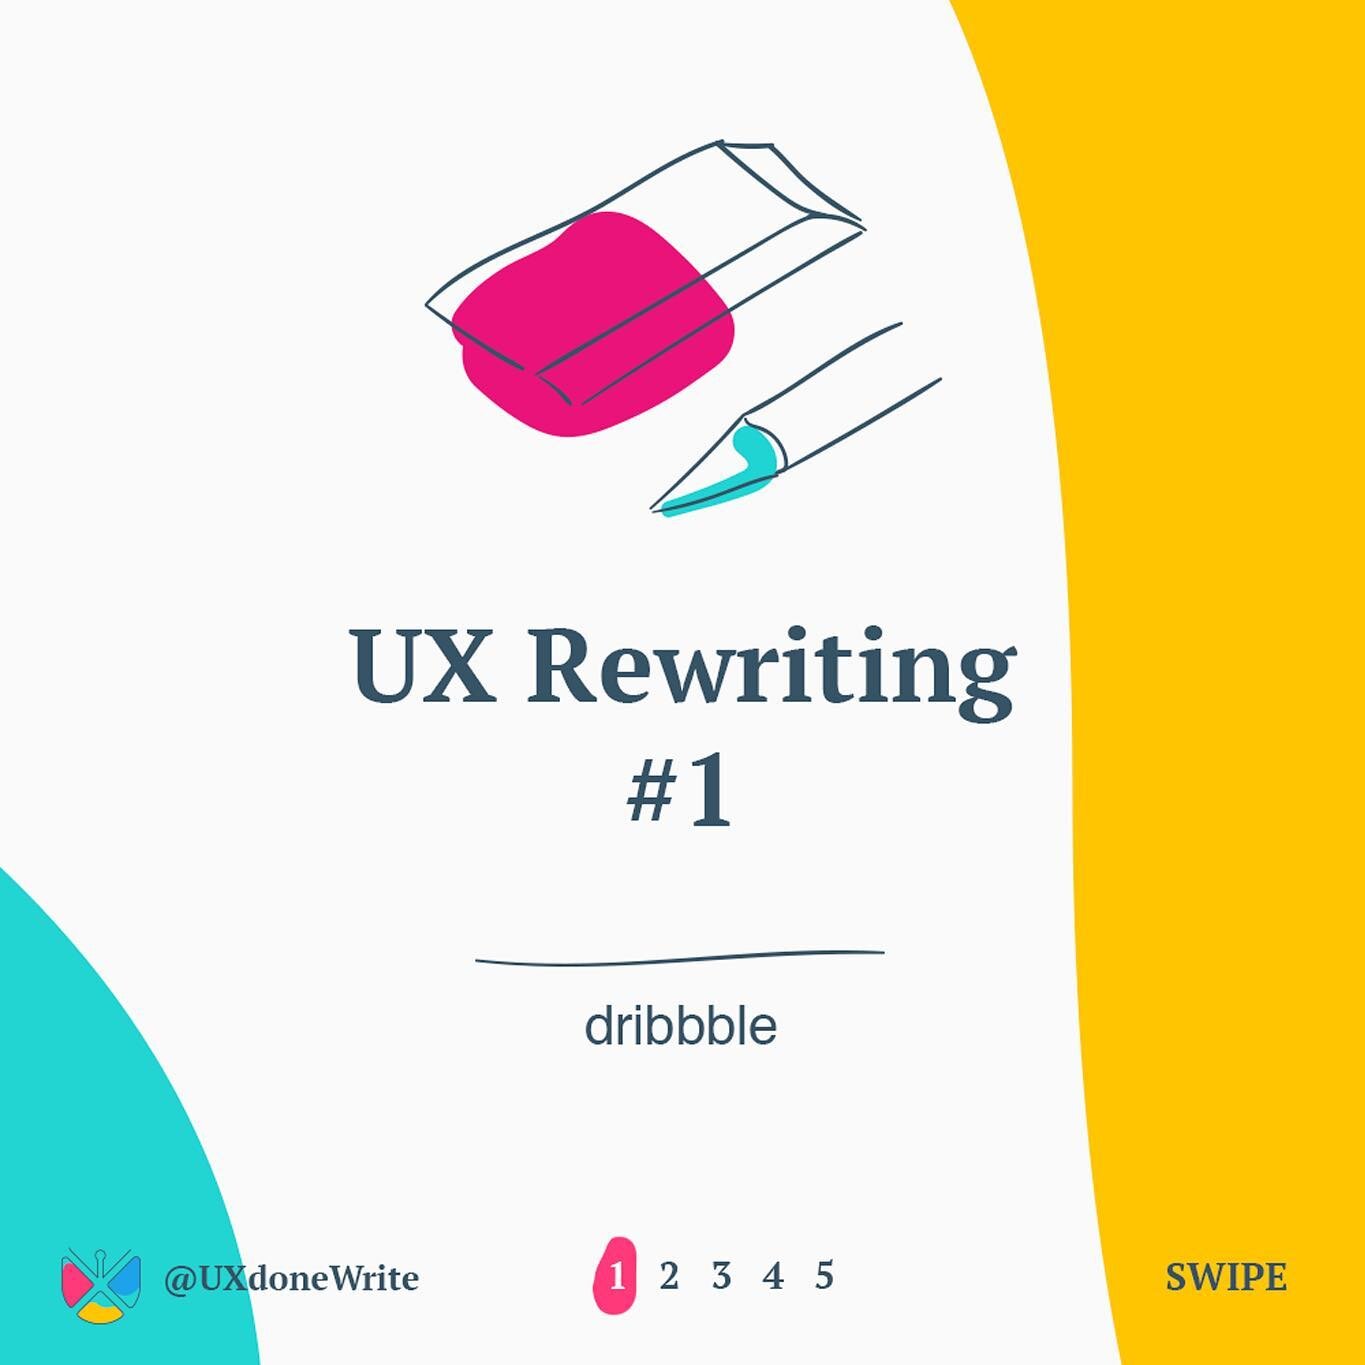 Taking a shot (pun intended) at a piece of content that caught my eye on the @dribbble careers page. Now how else could this be turned around?⁠⠀ &bull;
&bull;
&bull;
#uxwriting #uxwritingtips #uxrewriting #uxwritingprocess #uxinspiration #dailyuichal